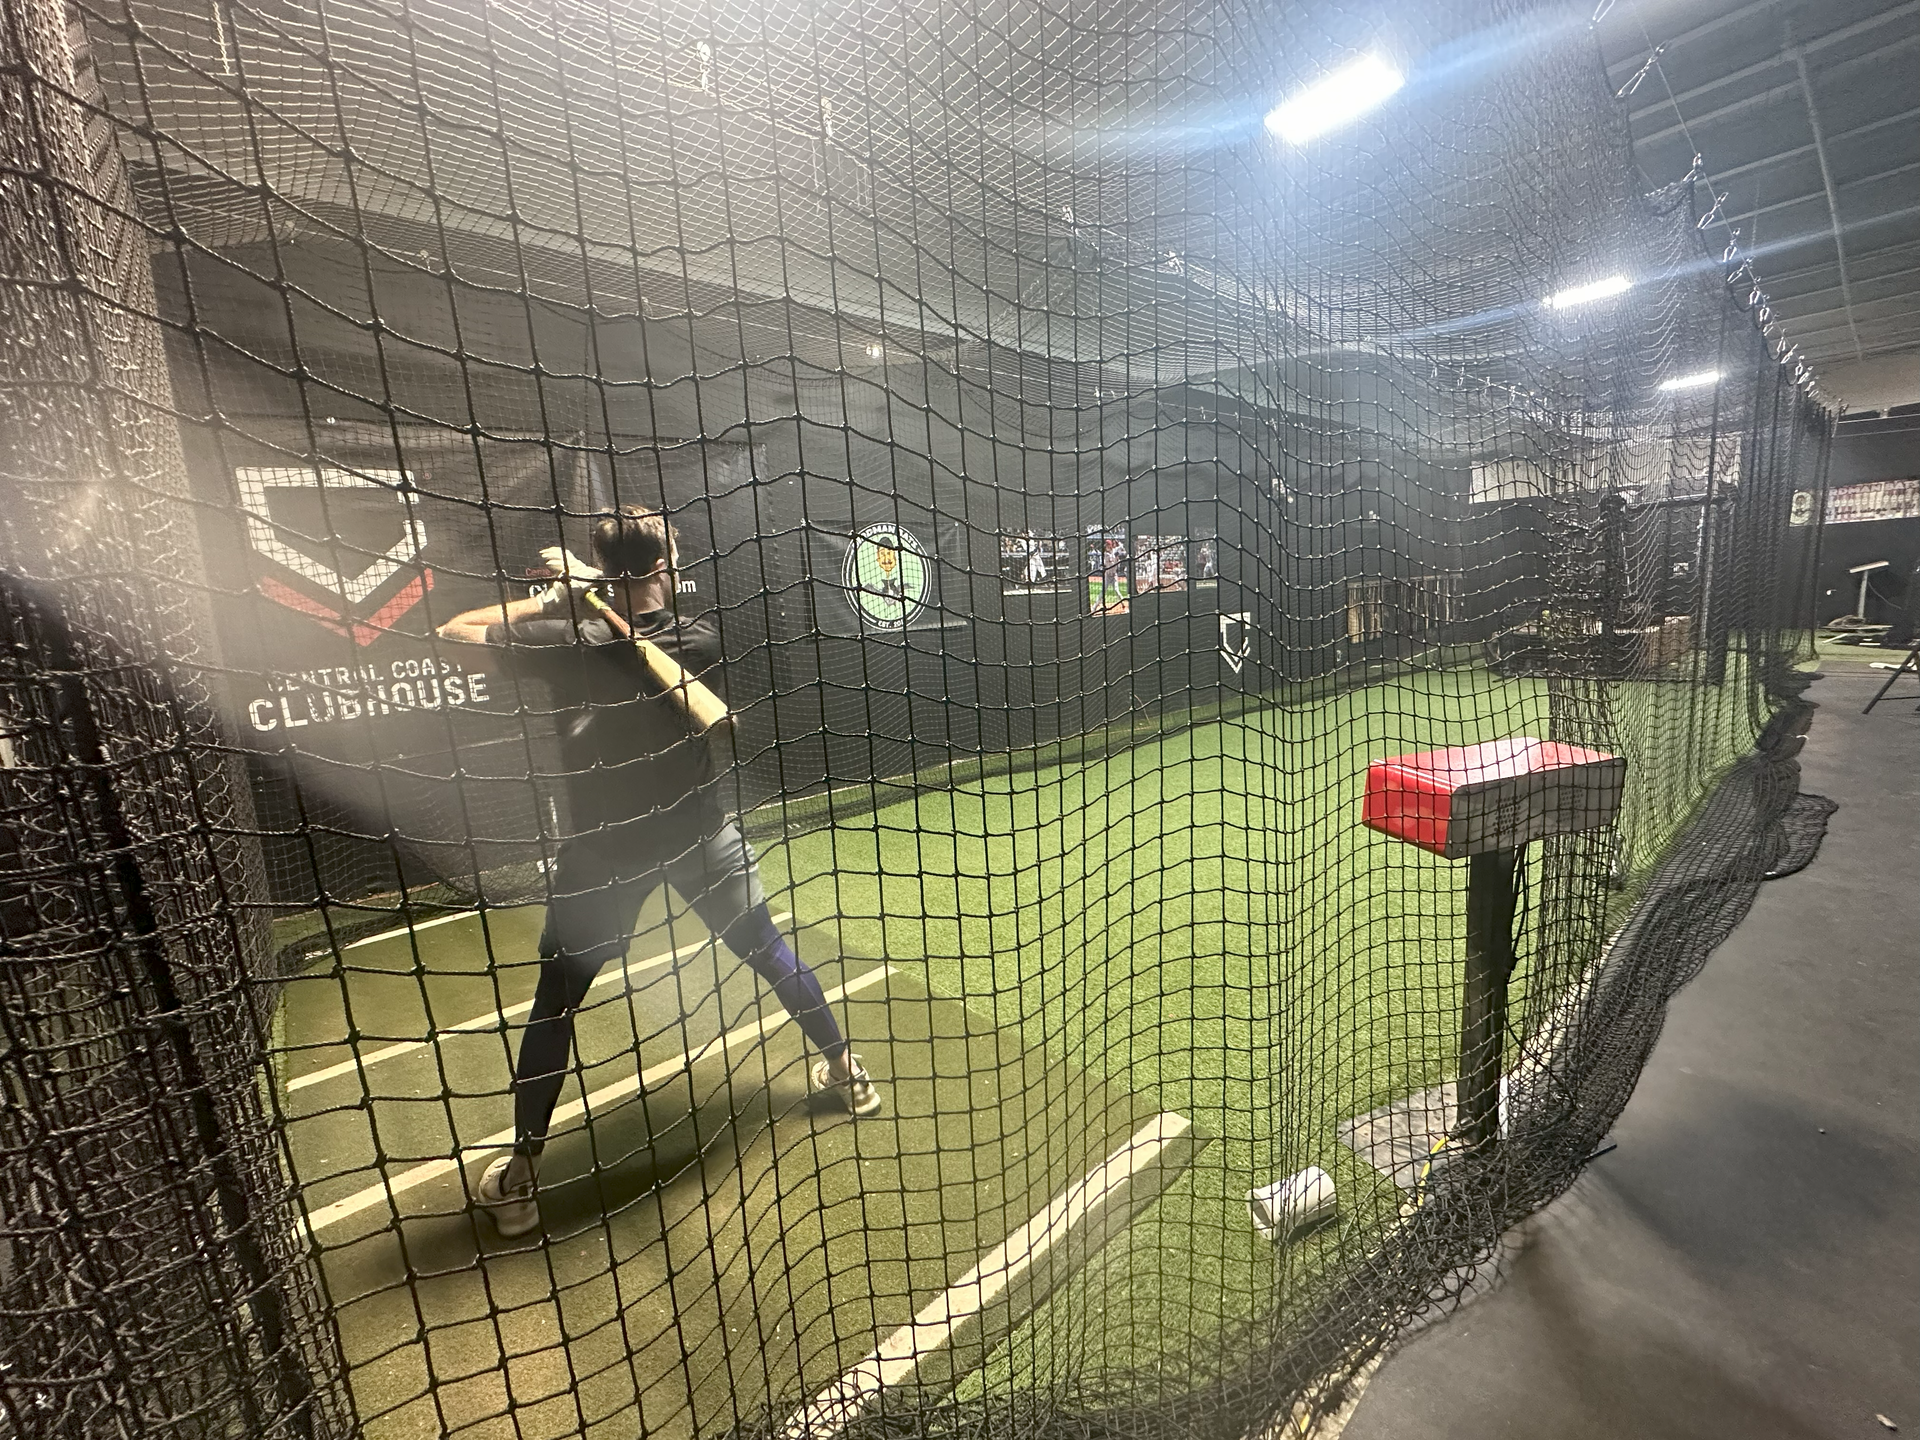 A person is swinging a bat at a ball in a Clubhouse 831 batting cage.